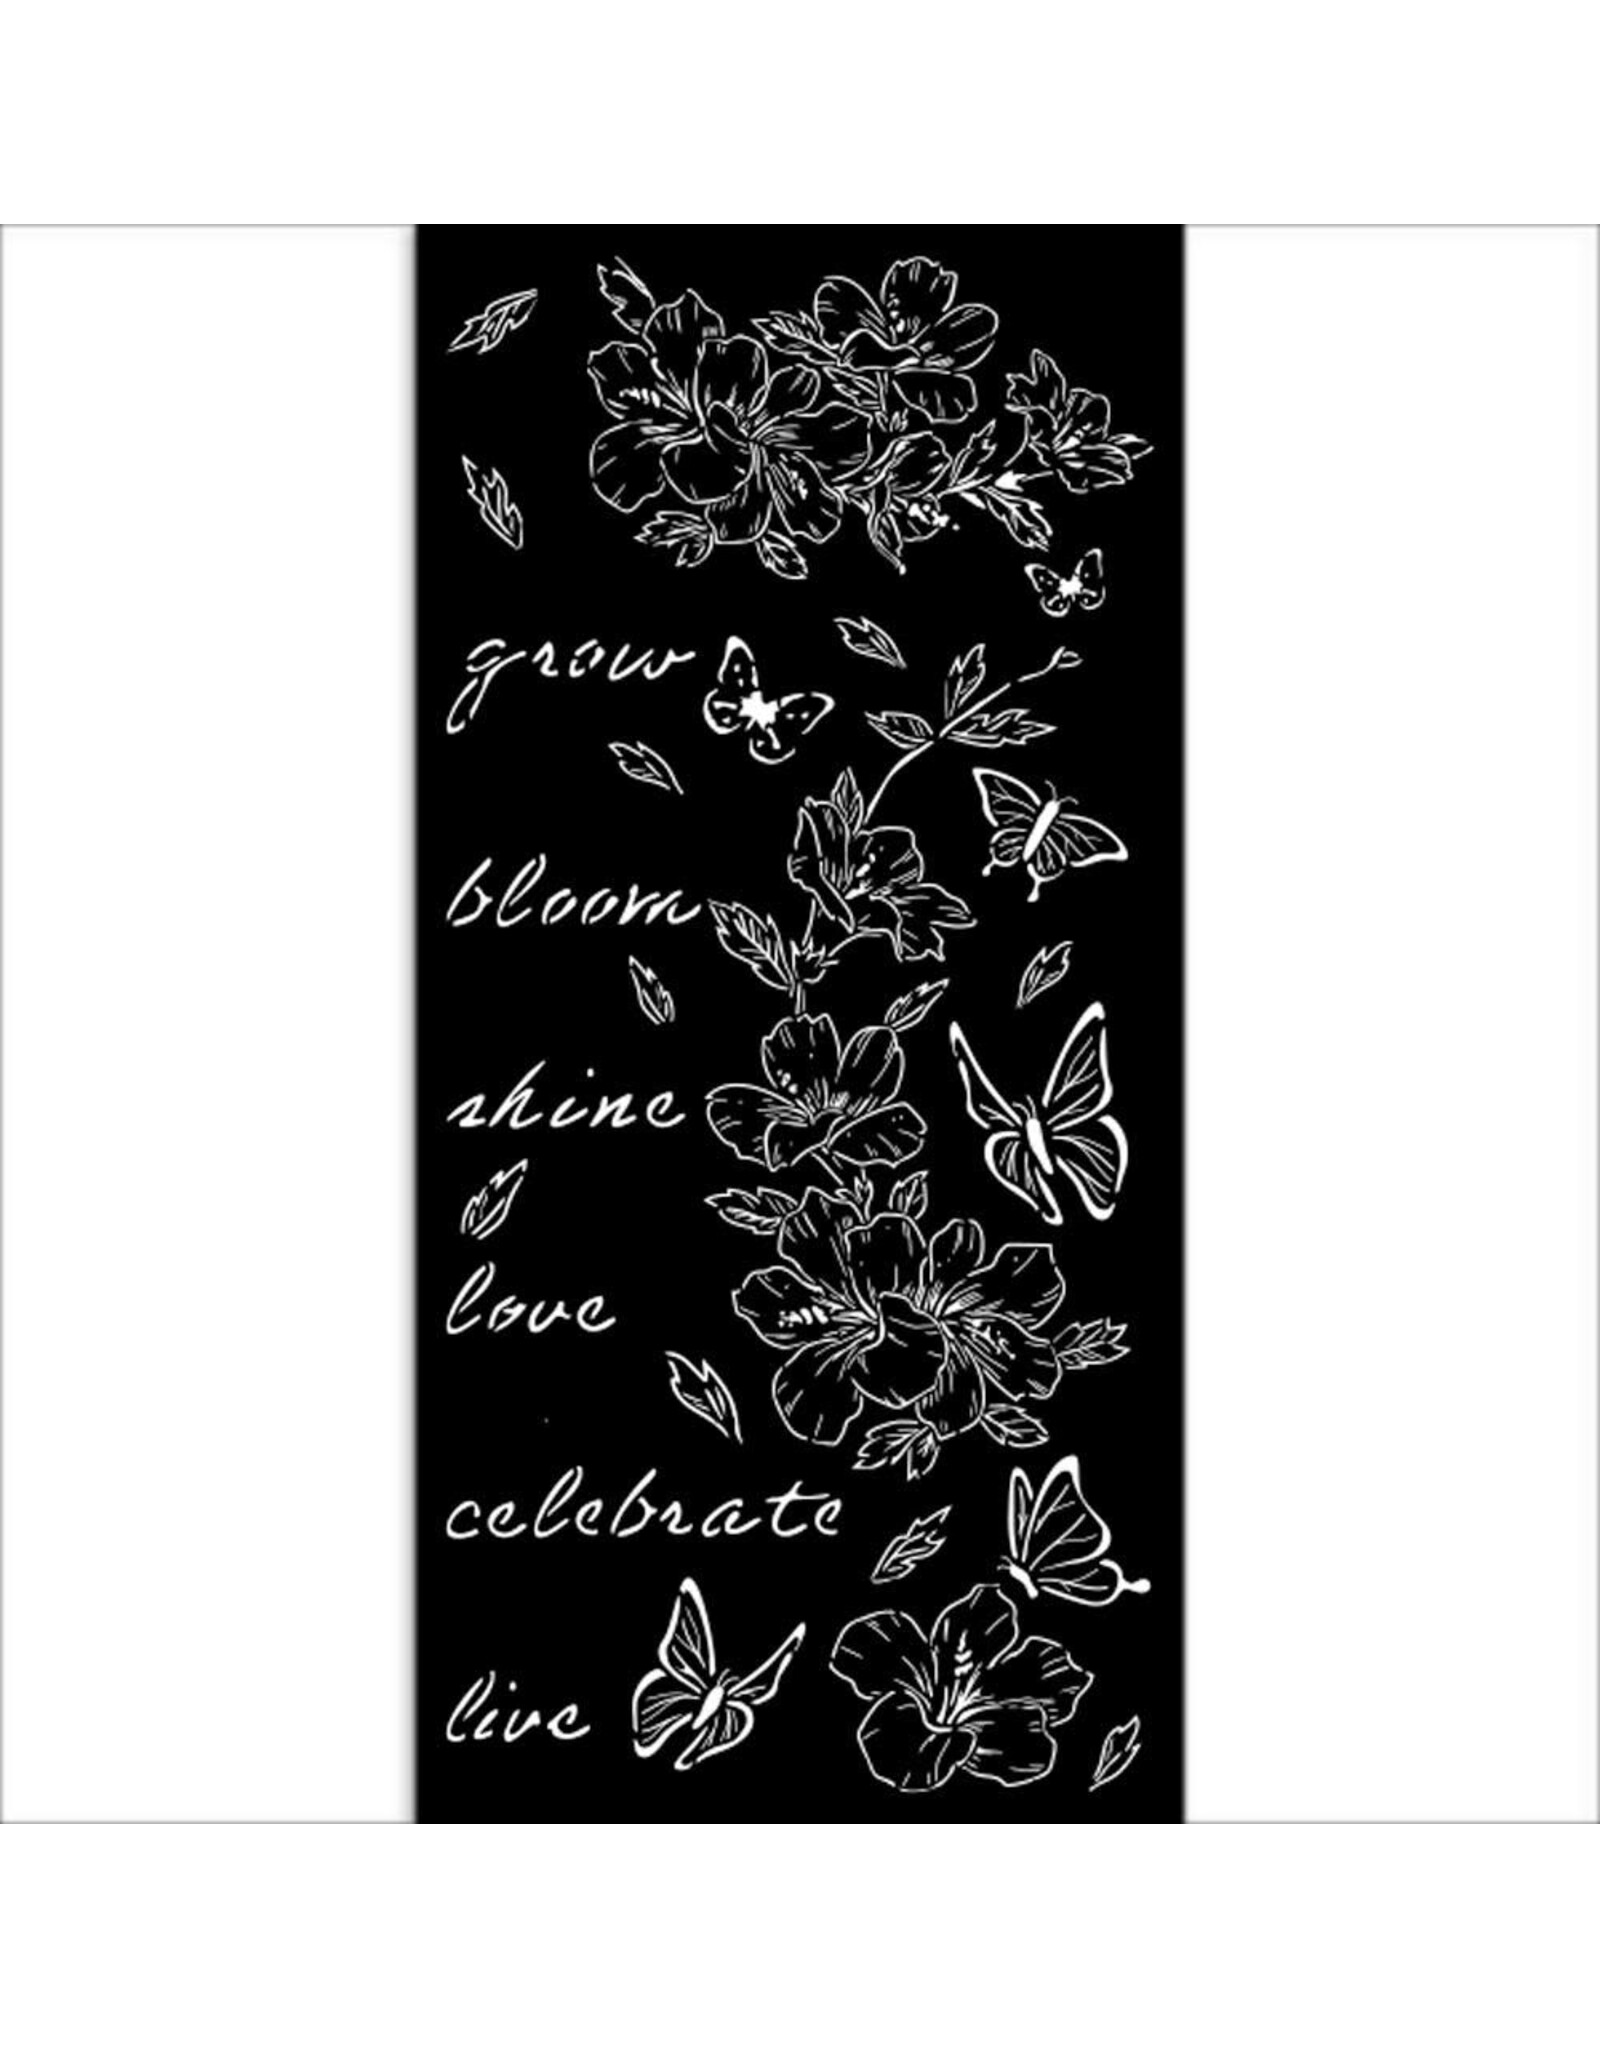 STAMPERIA STAMPERIA VICKY PAPAIOANNOU CREATE HAPPINESS SECRET DIARY FLOWERS & BUTTERFLY STENCIL